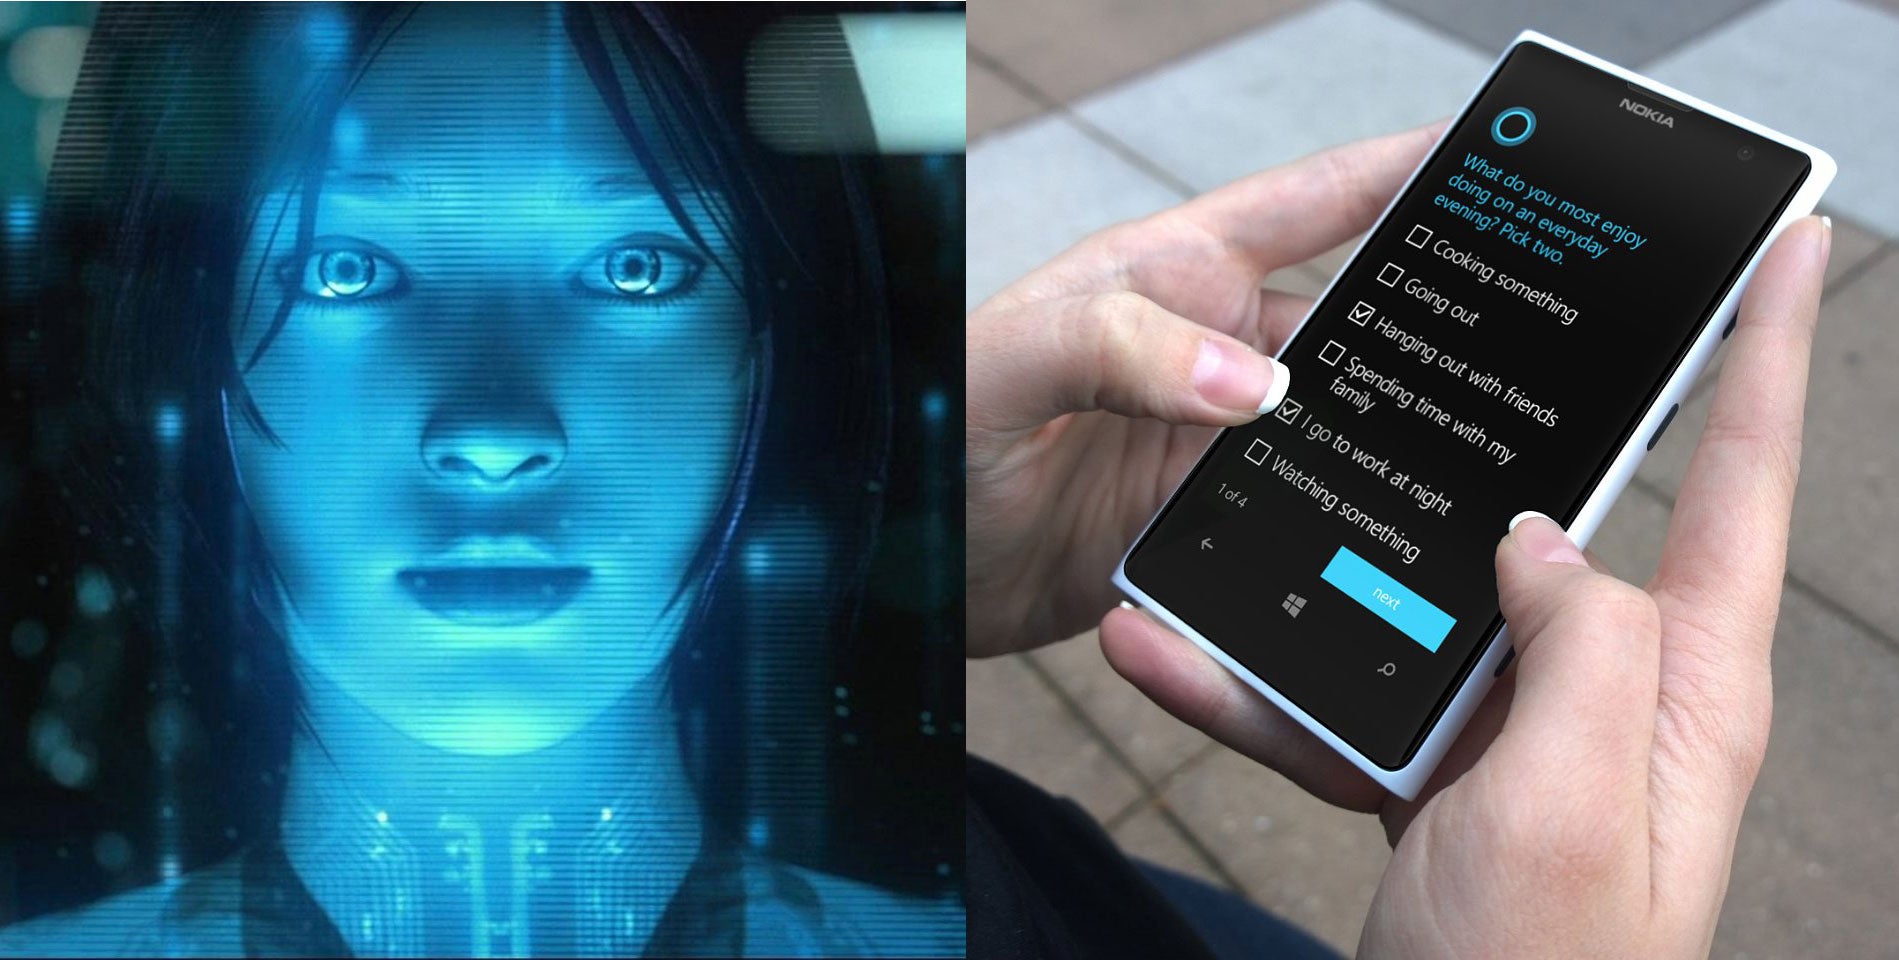 Cortana as she appears in the videogame series Halo (left) and on Windows Phone (right).